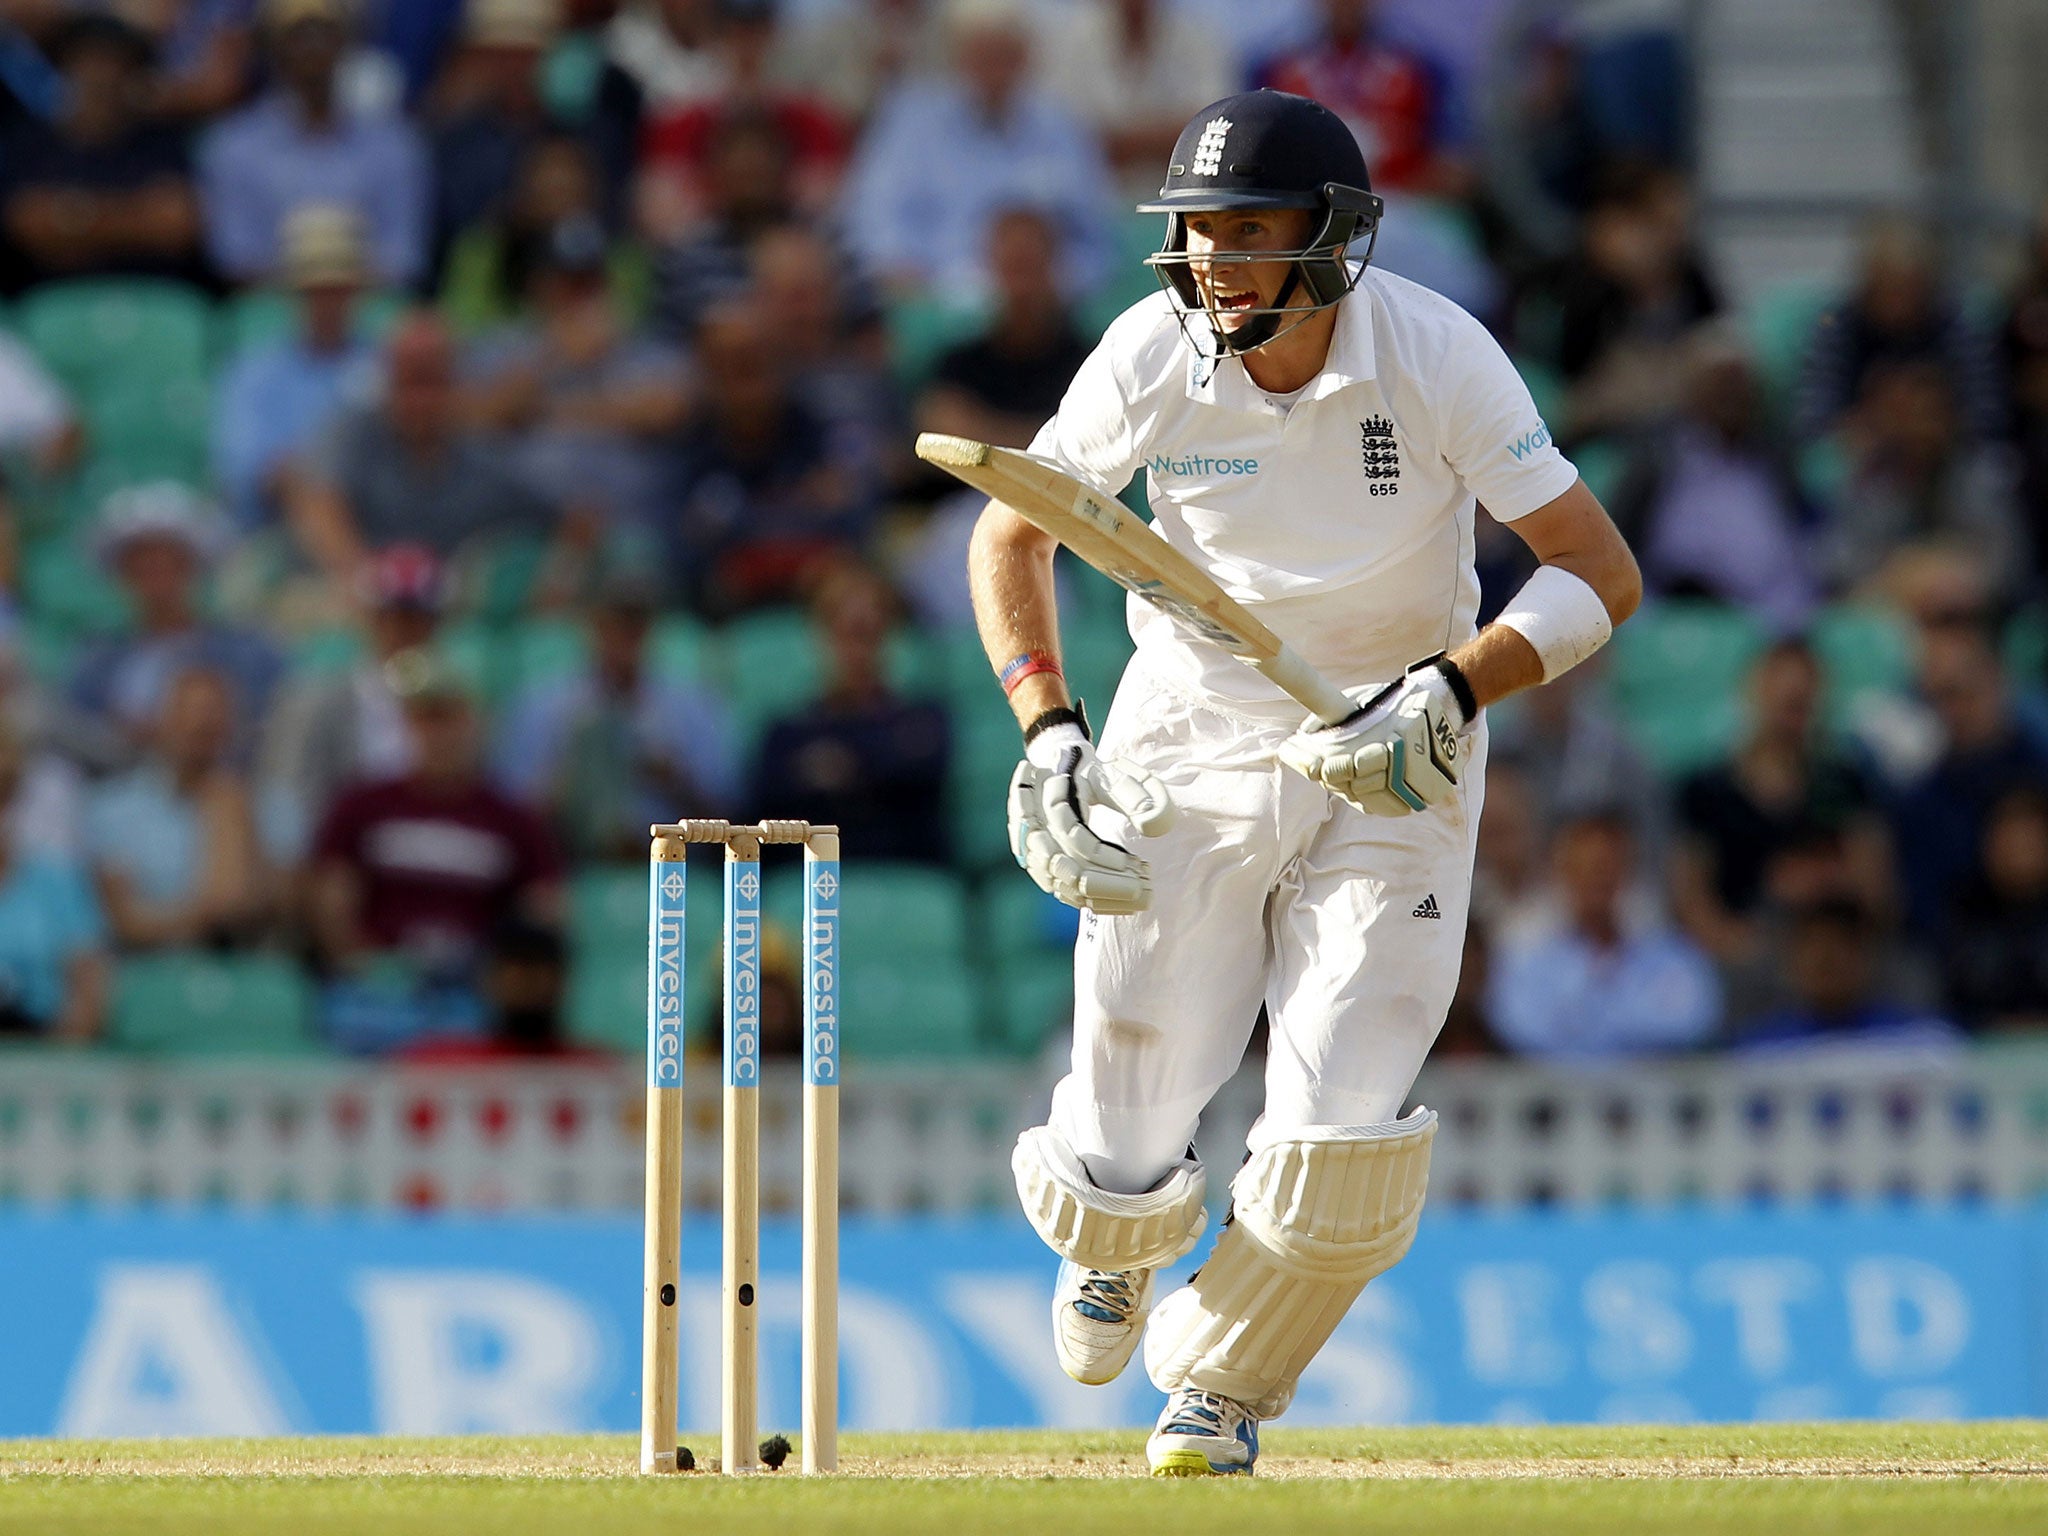 Joe Root steals a single on day two of the fifth Test